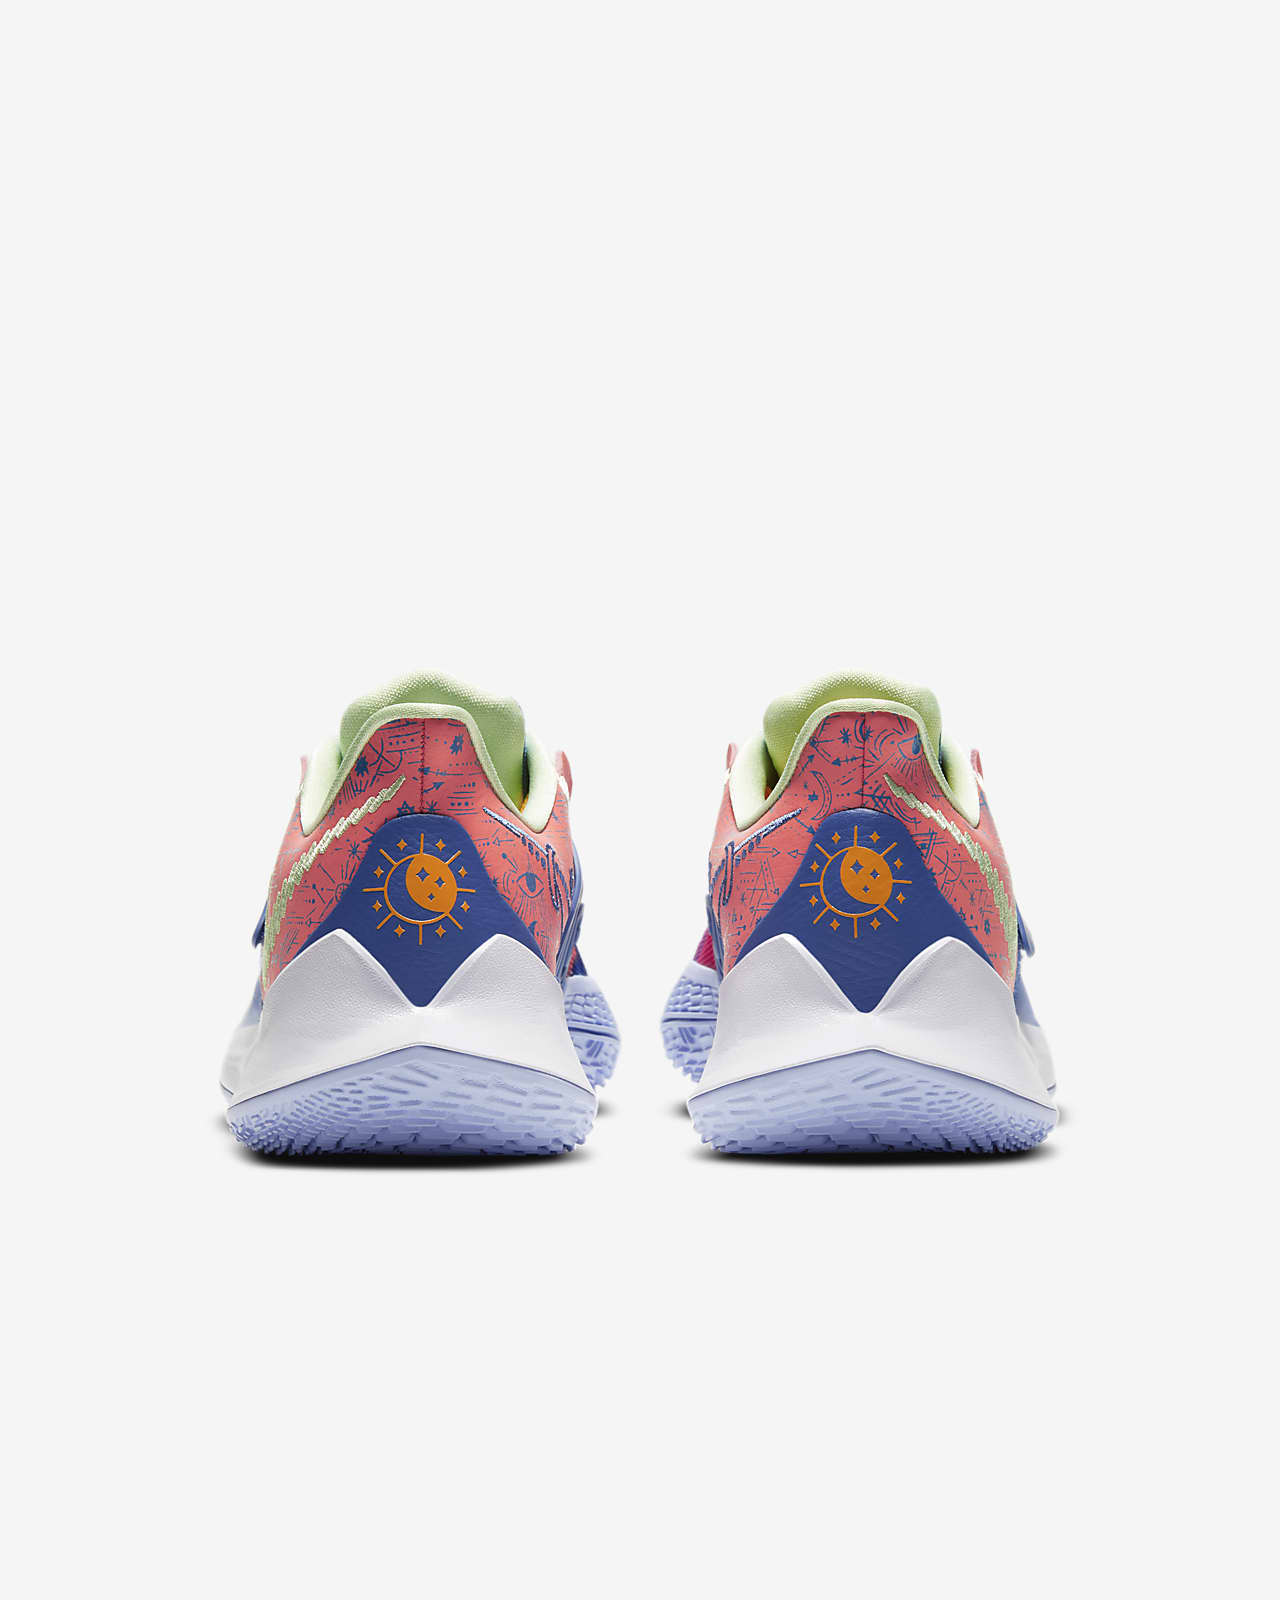 kyrie irving low shoes